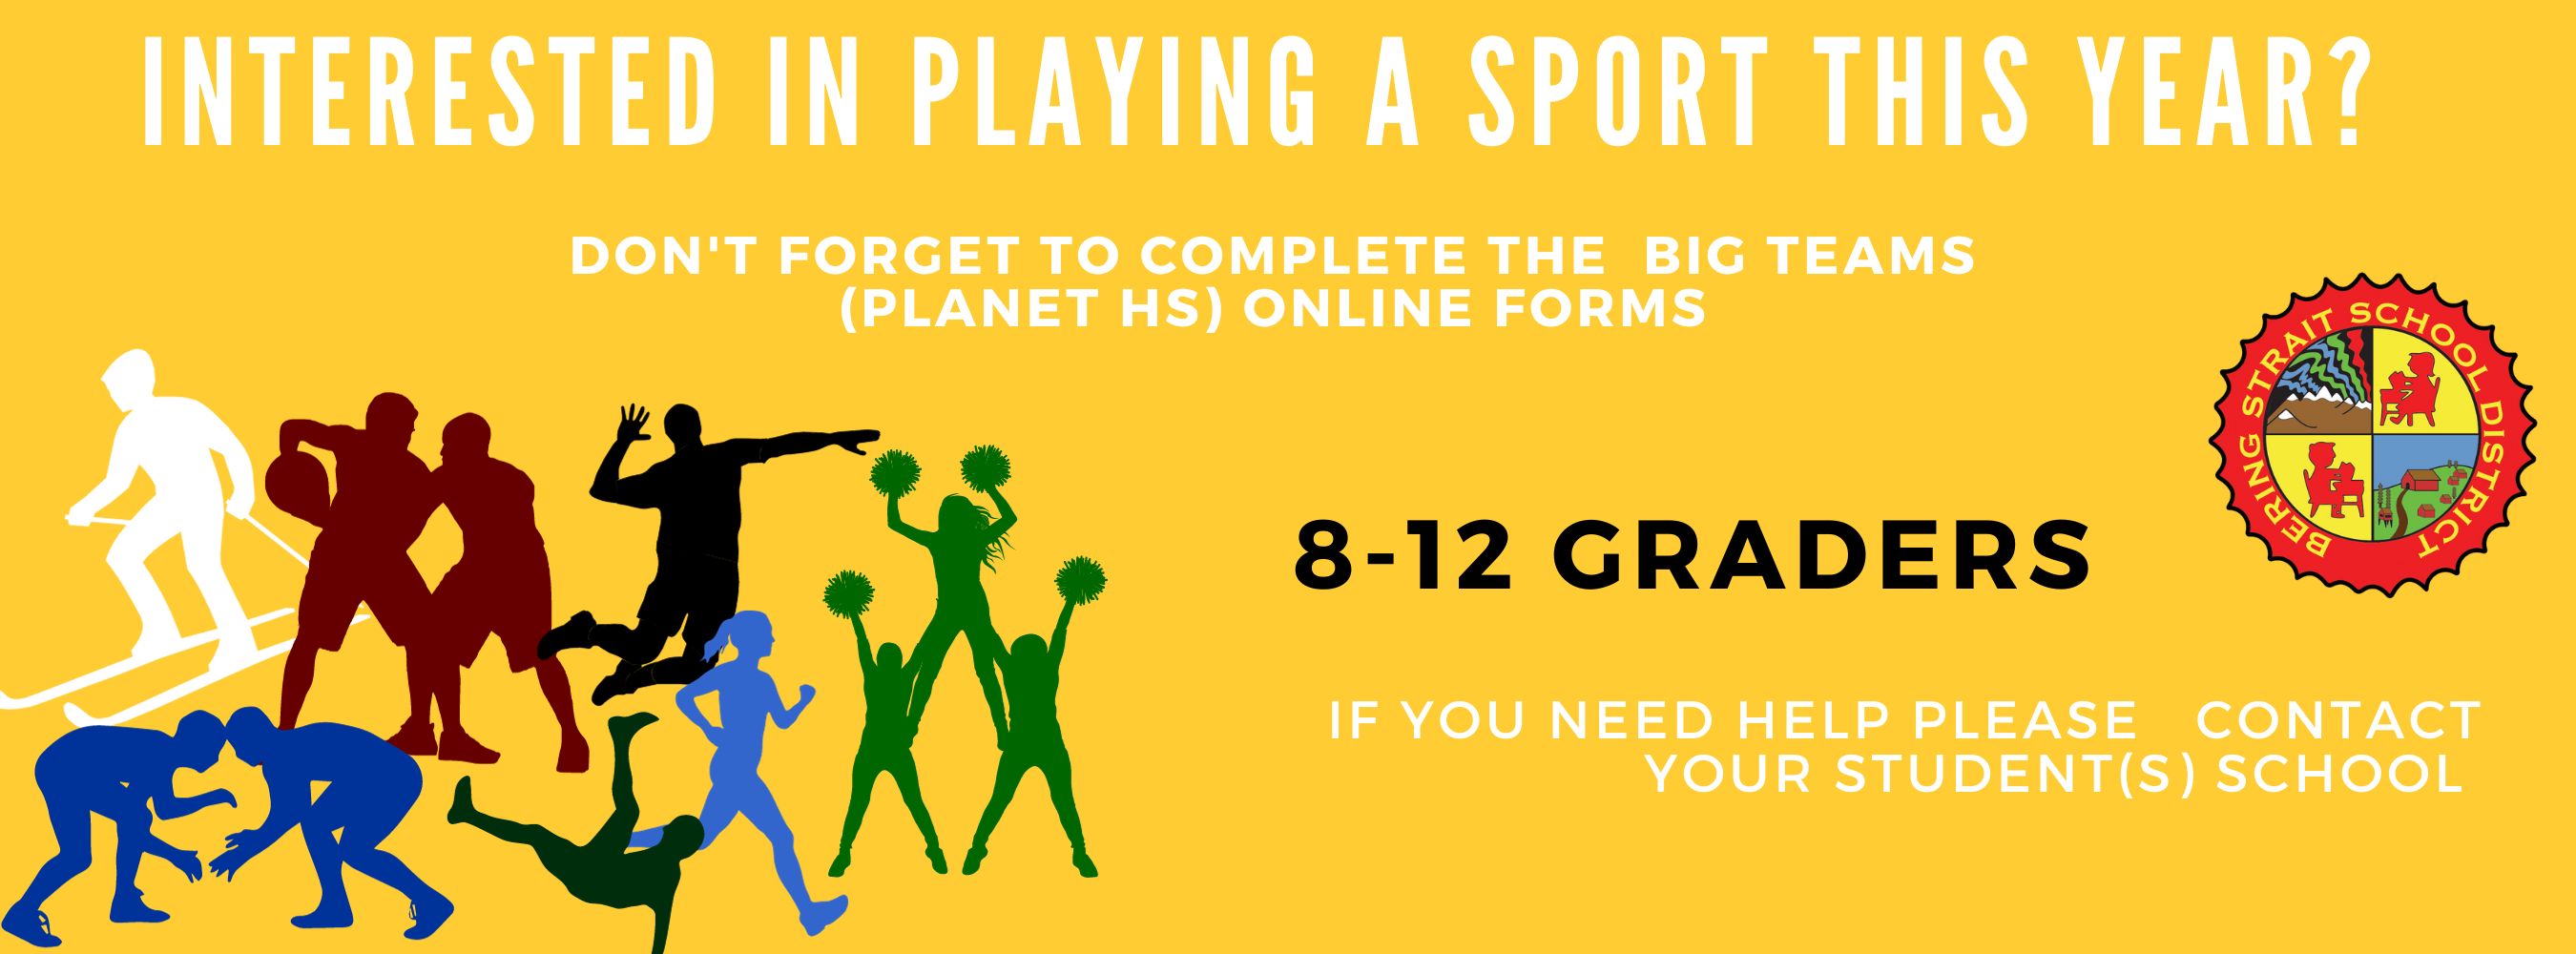 Announcement for students playing sport to complete Big Teams Online Forms